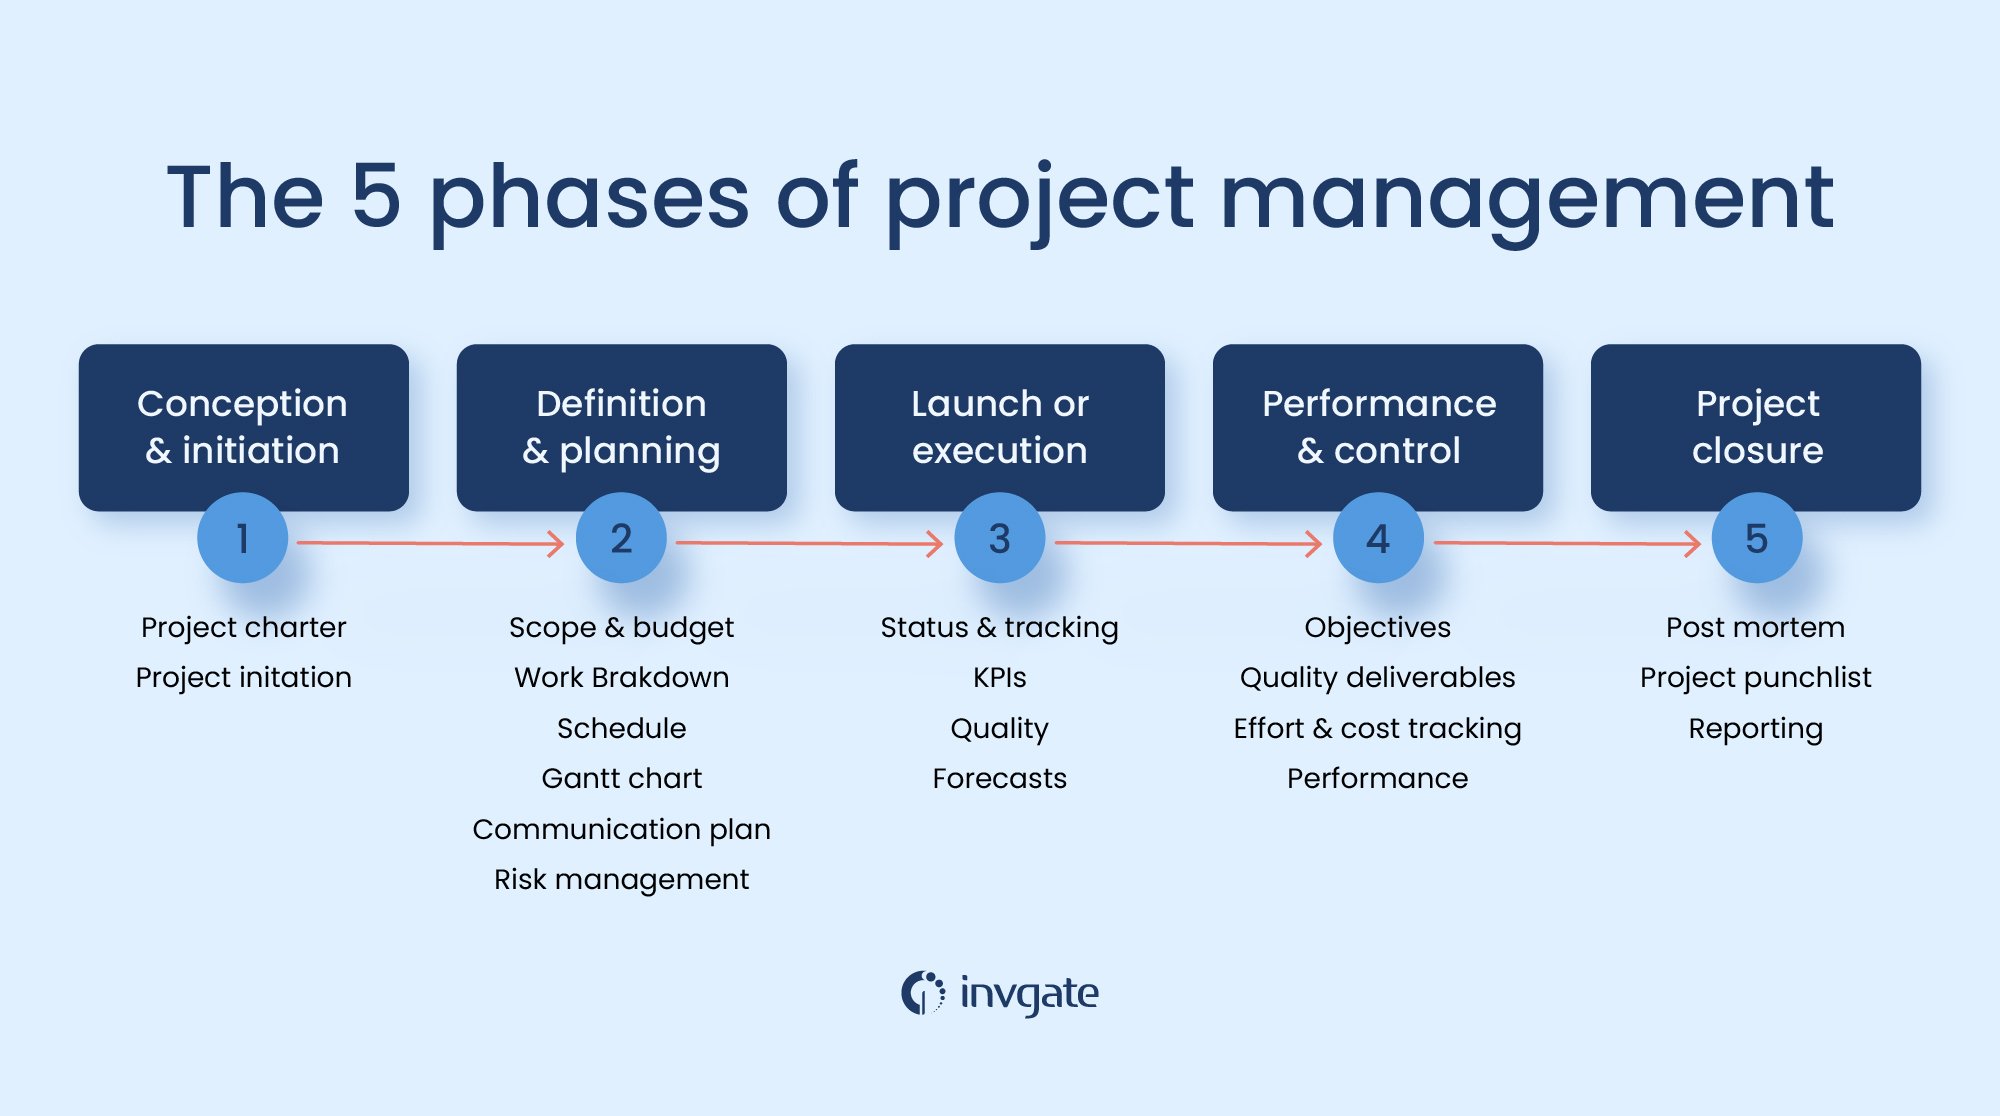 5 Phases of Project Management Process - A Complete Breakdown